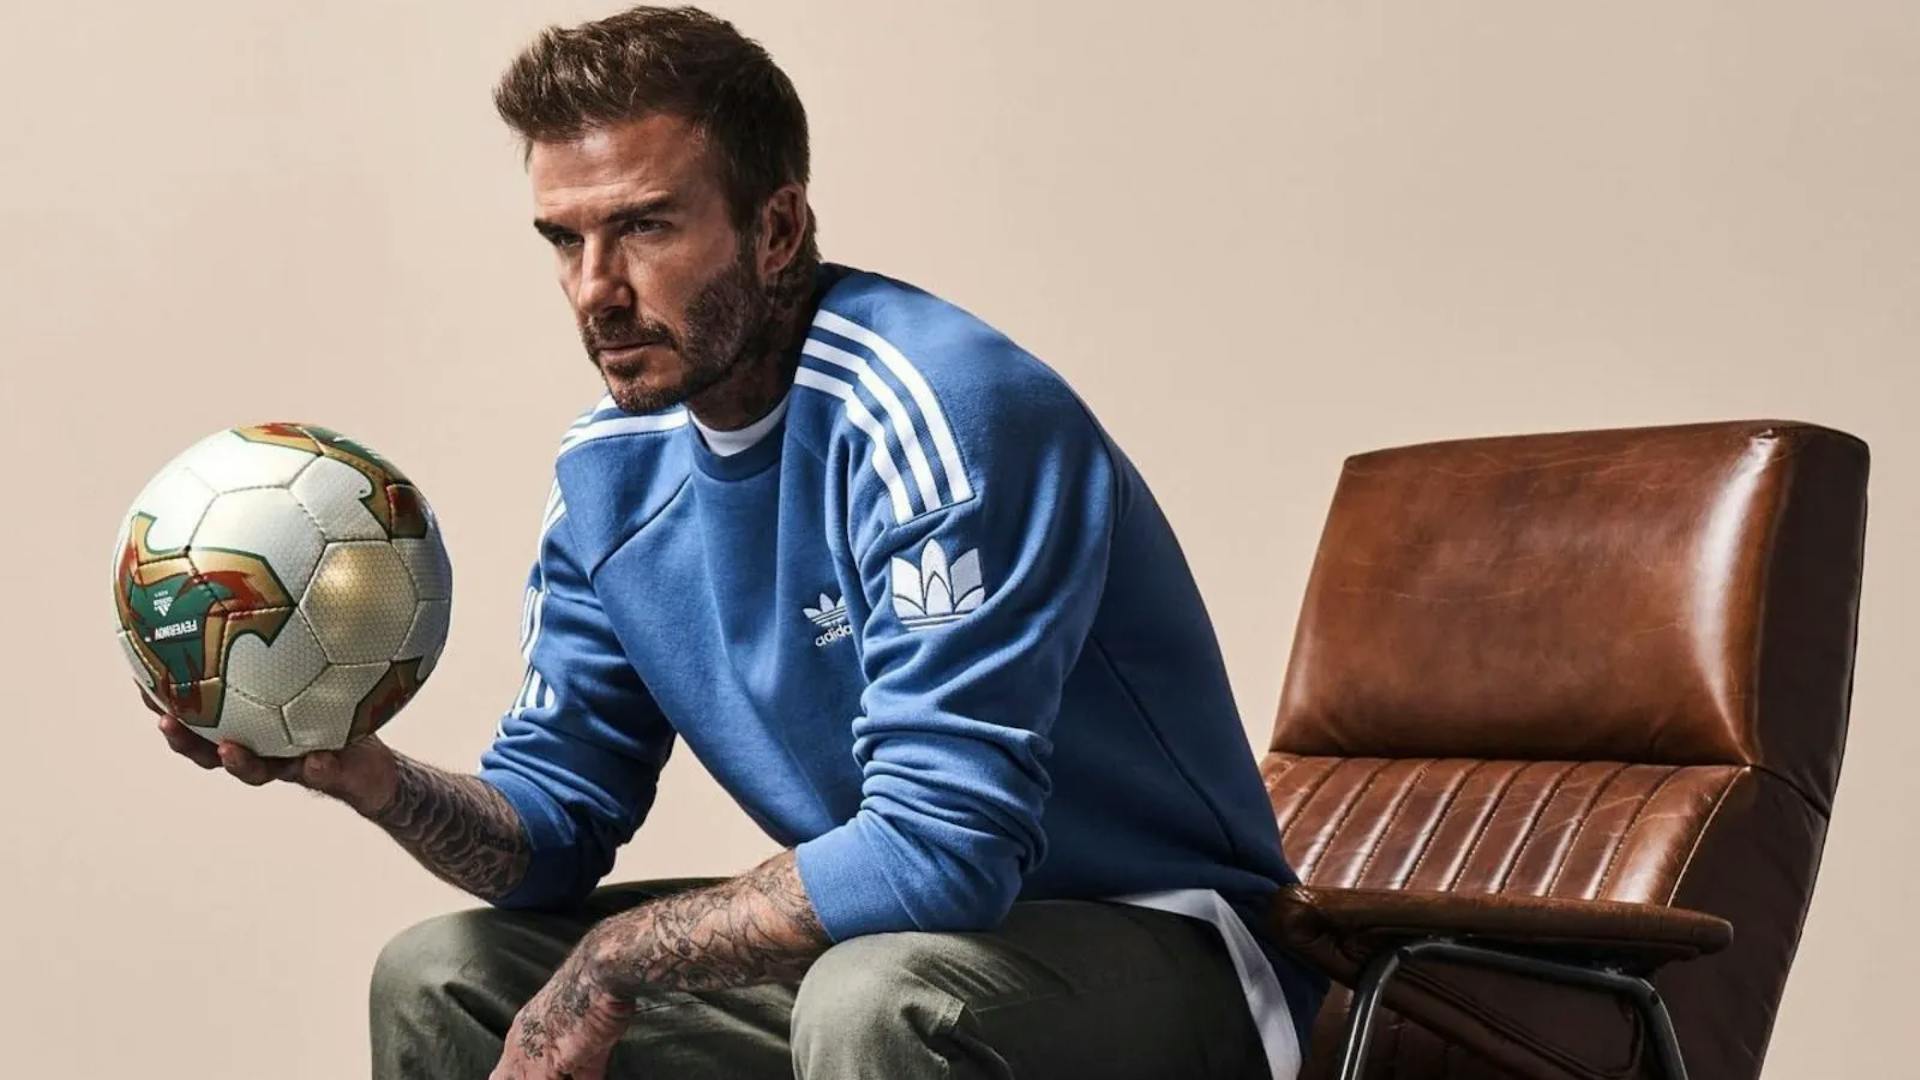 David Beckham sitting in a leather chair holding a football.